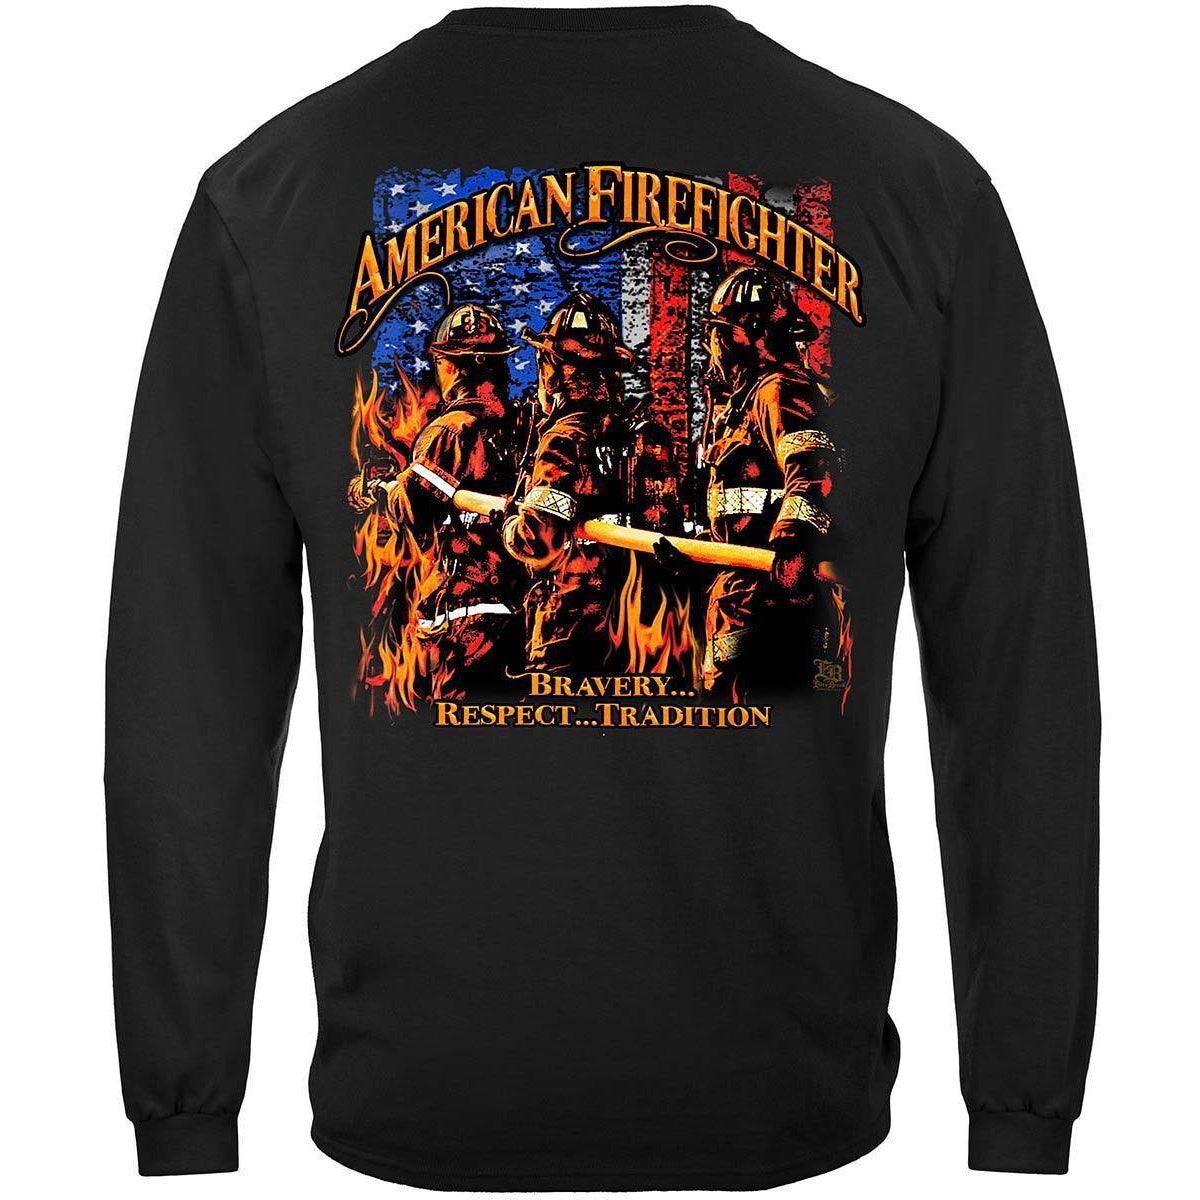 American Firefighter T-Shirt - Military Republic